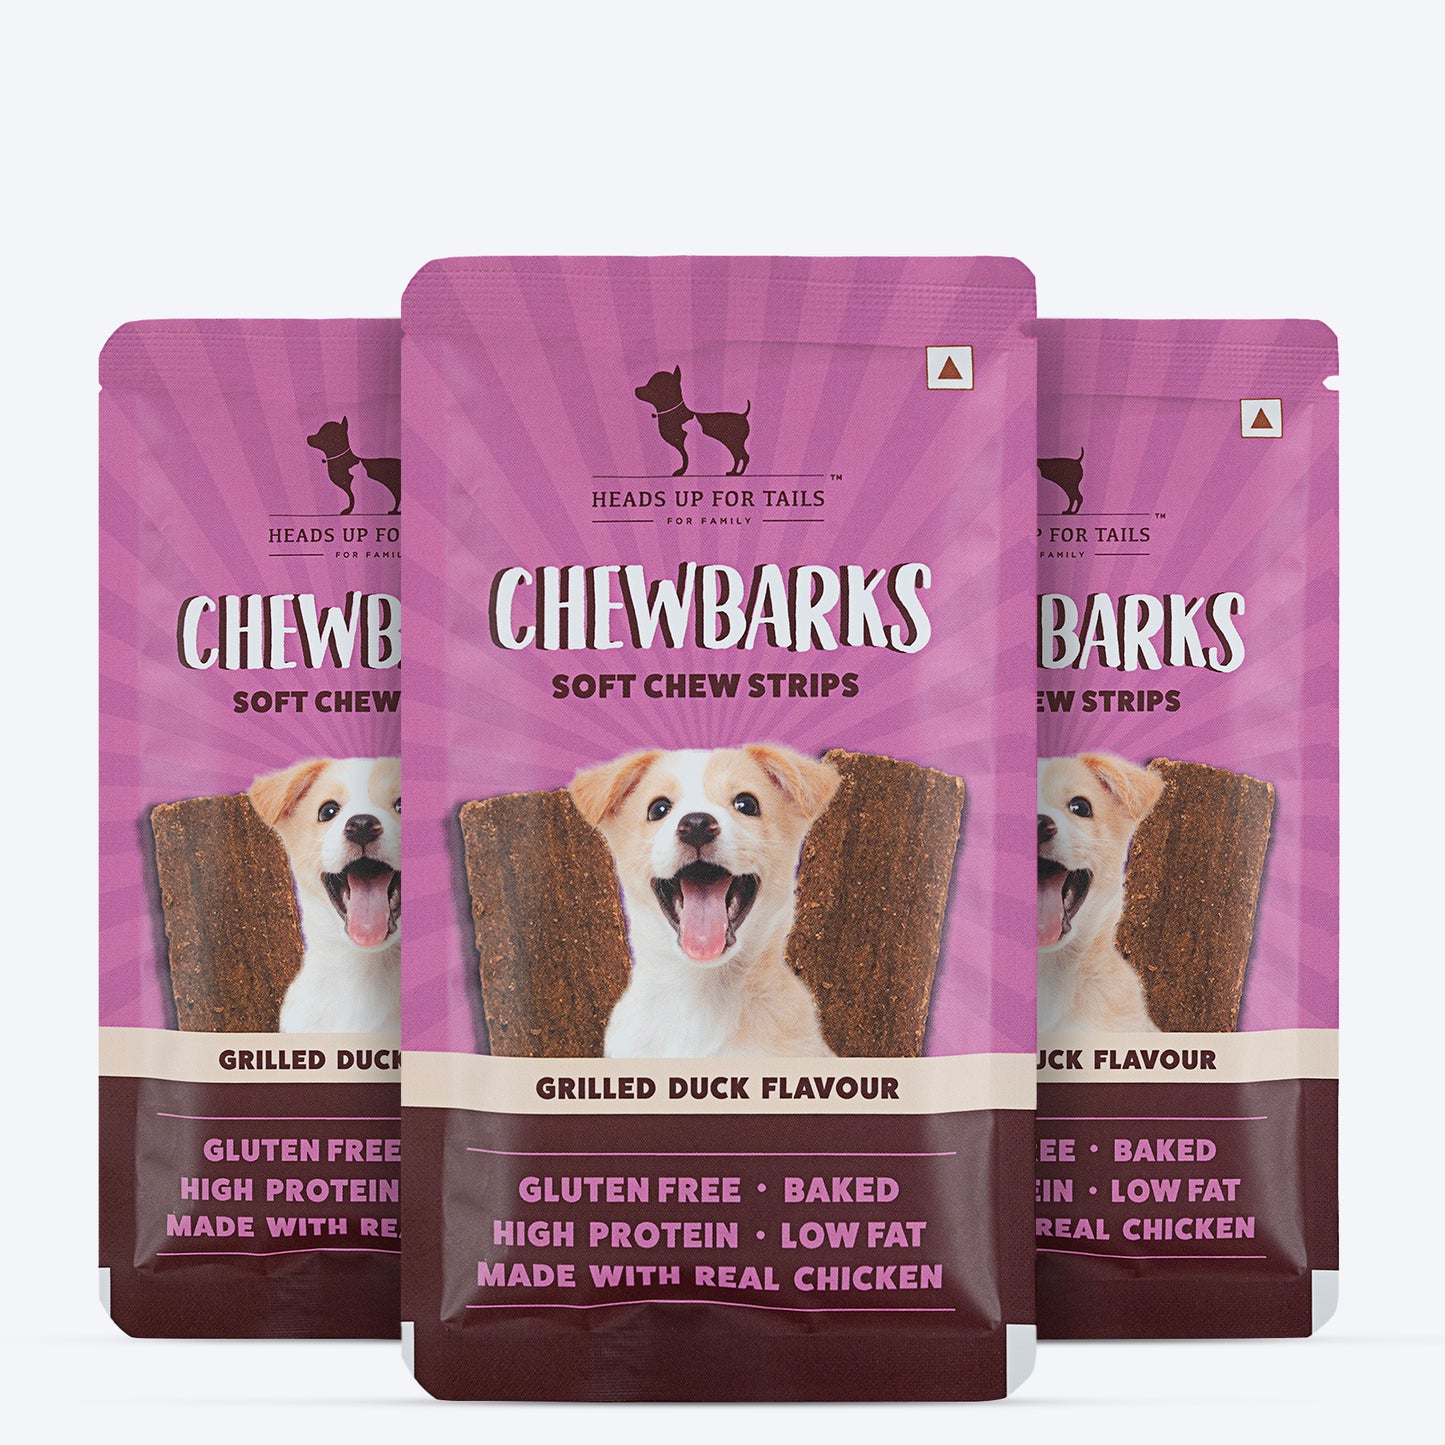 HUFT Chewbarks Grilled Duck Soft Chew Strips Treat For Dogs - 30g - Heads Up For Tails